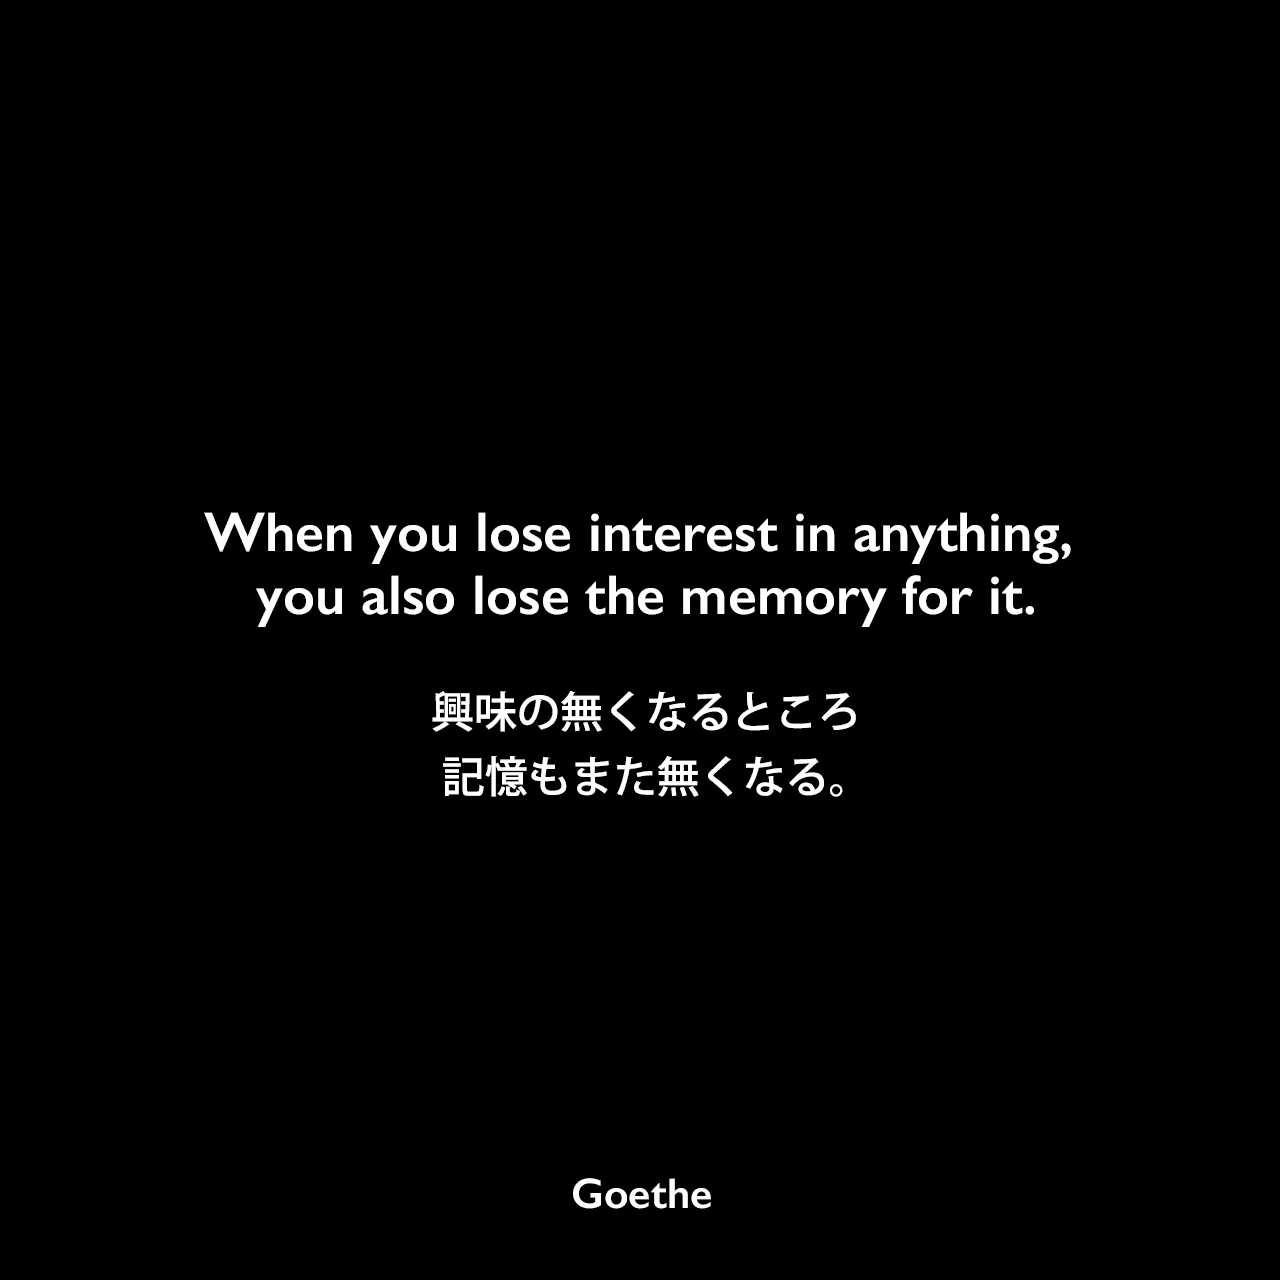 When you lose interest in anything, you also lose the memory for it.興味の無くなるところ、記憶もまた無くなる。Johann Wolfgang von Goethe